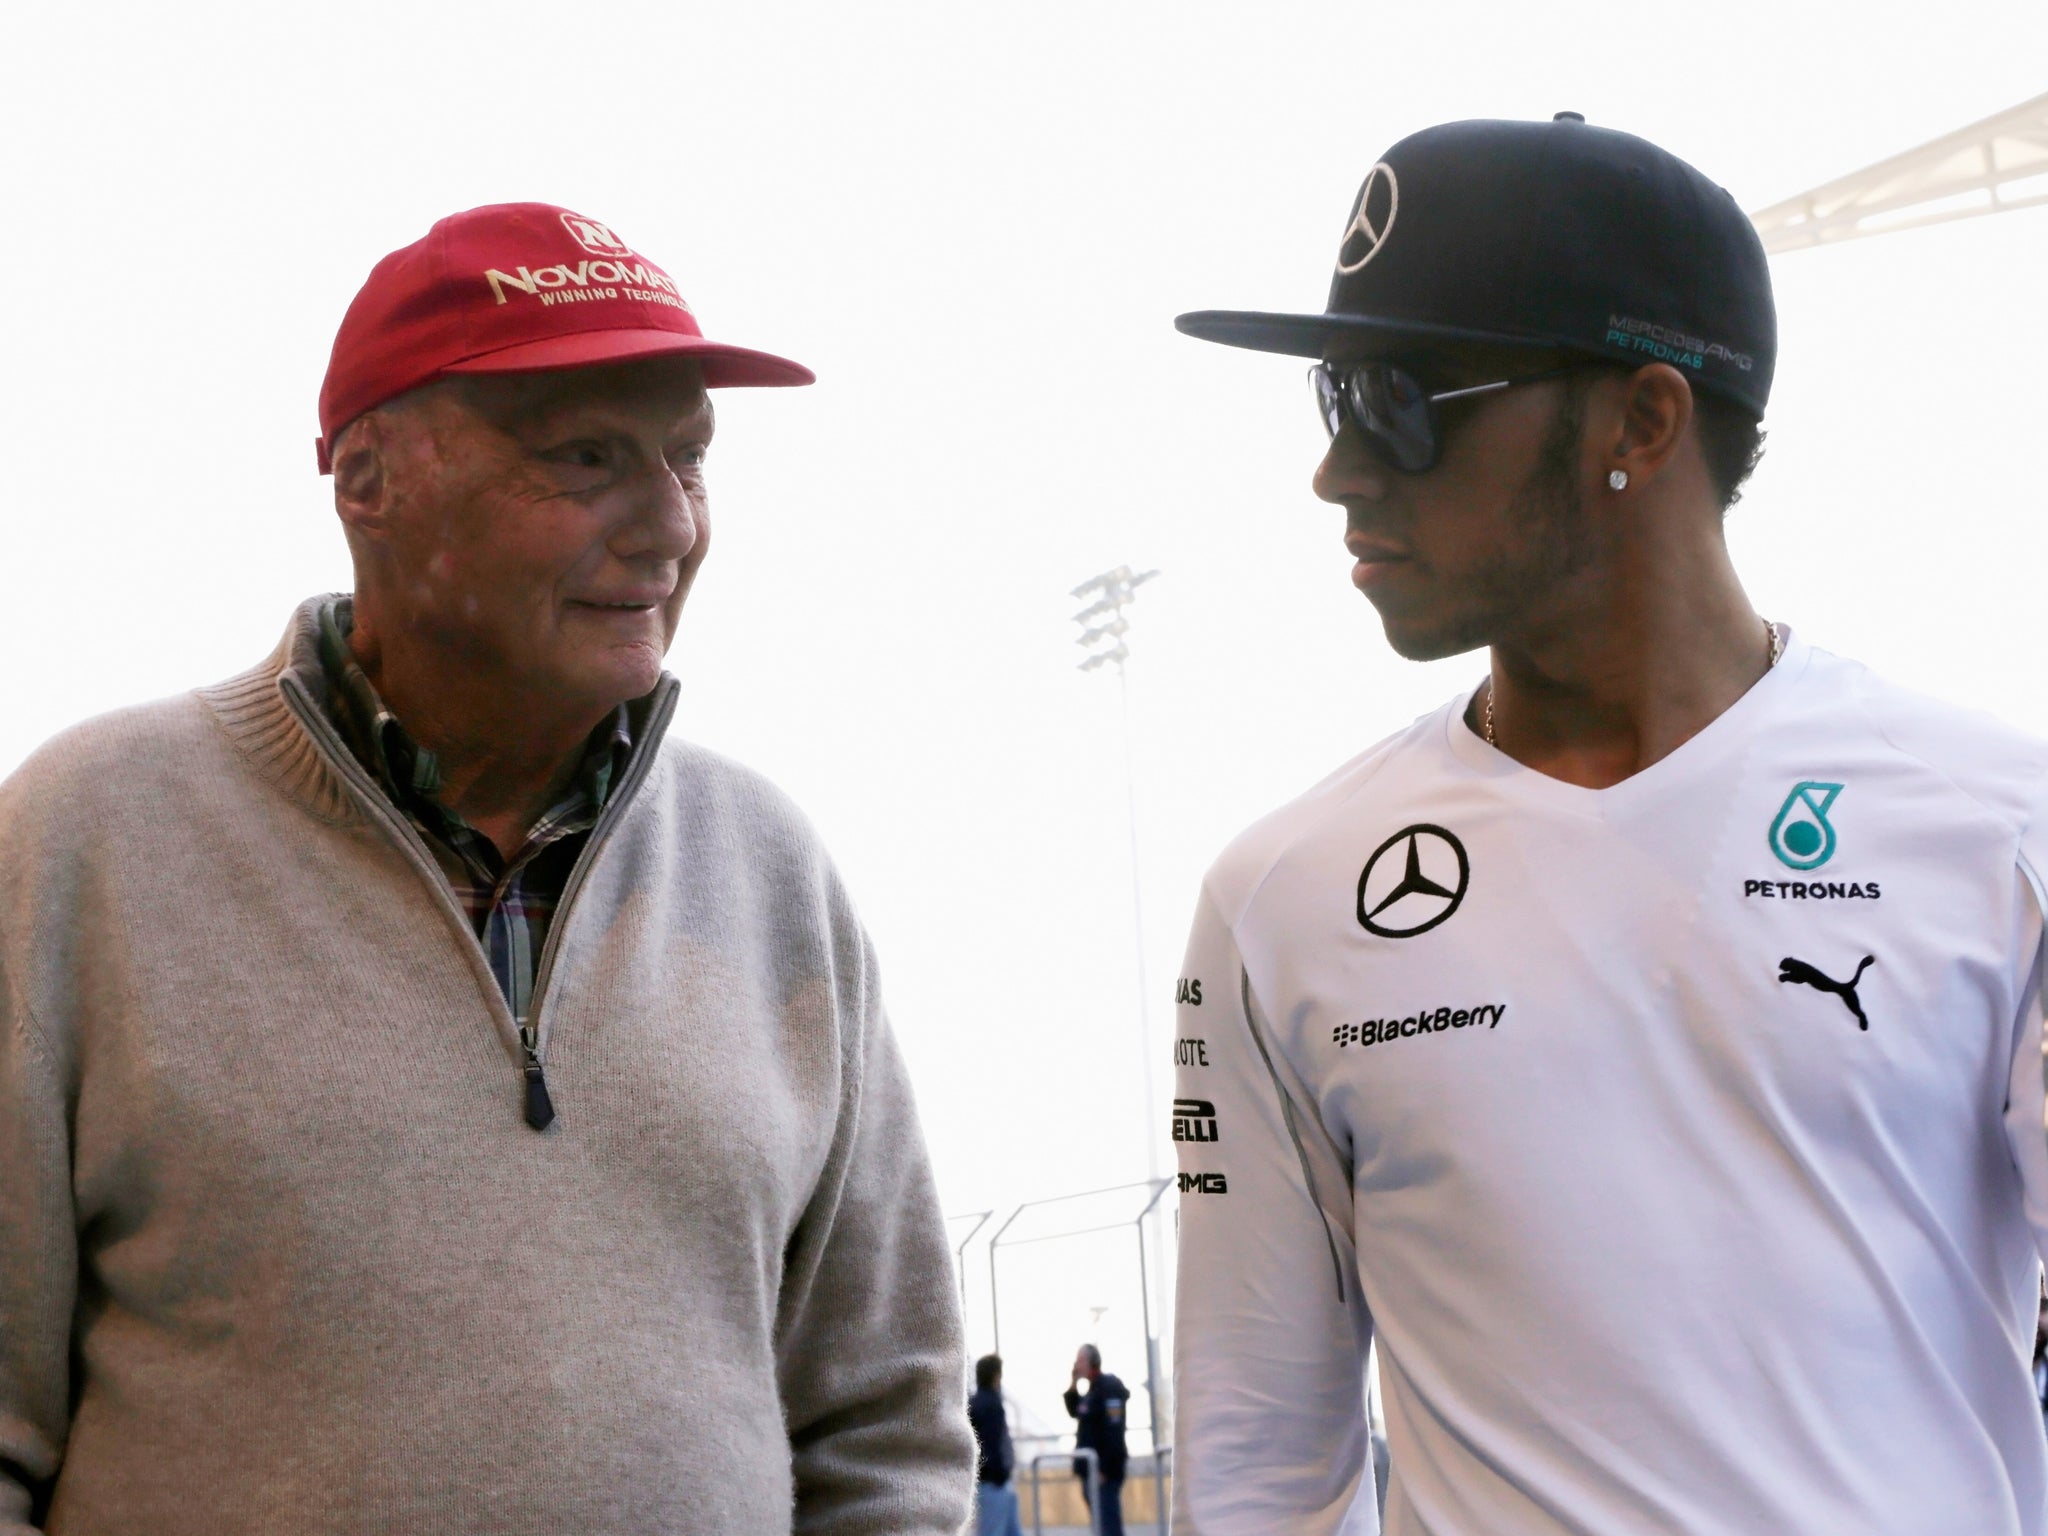 Niki Lauda of Mercedes wants his drivers to battle each other for the title